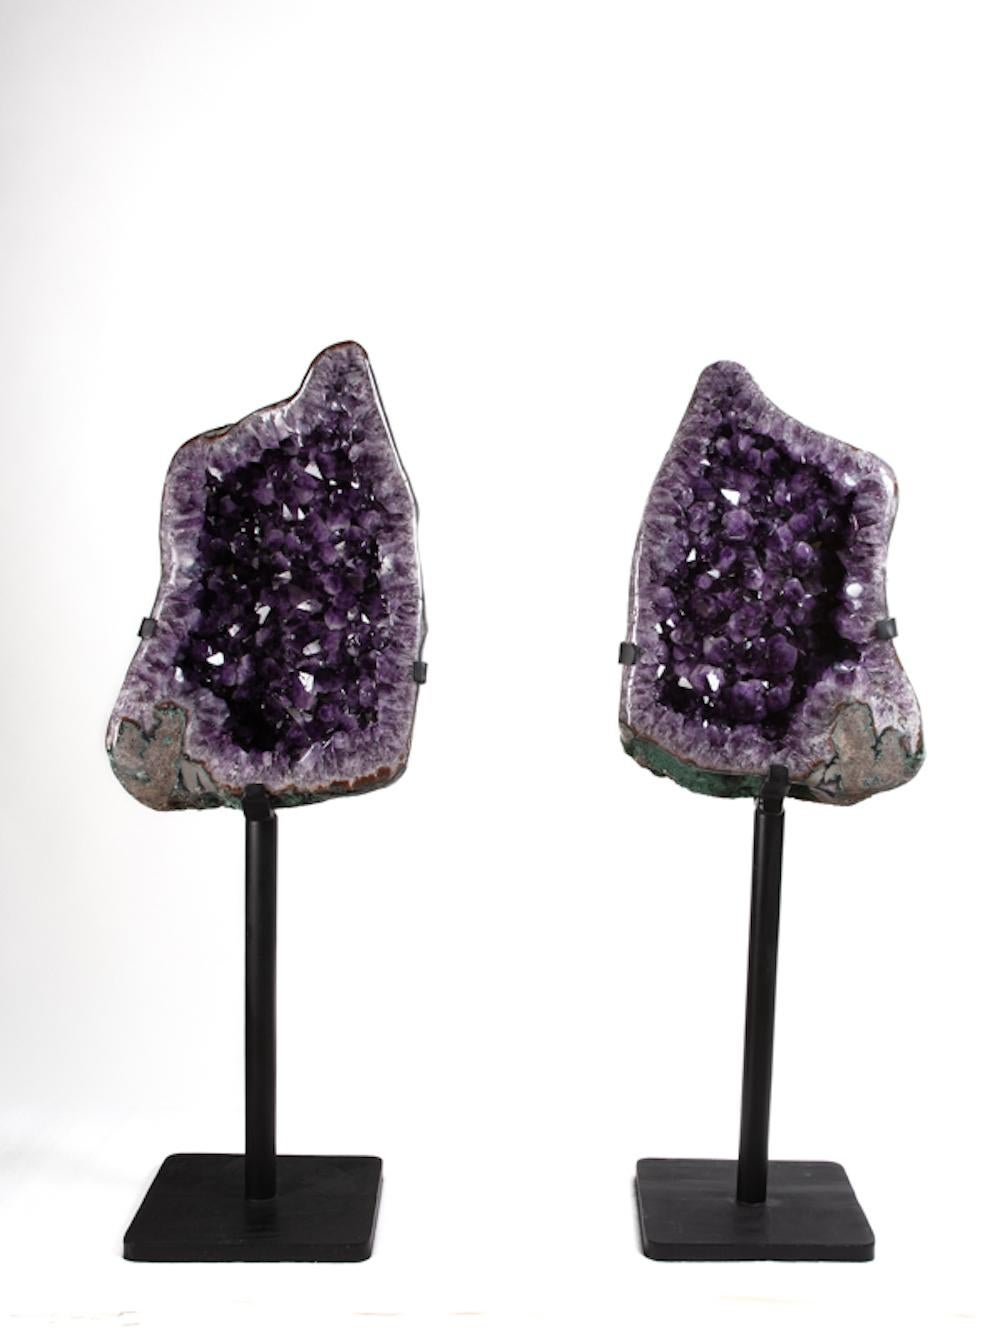 240kg (106kg and 101kg are the pieces without the stands). 

Amethyst is a quartz containing traces of manganese oxide are responsible for the violet color. Amethyst is usually found in cavities of volcanic rock and is also present in ore